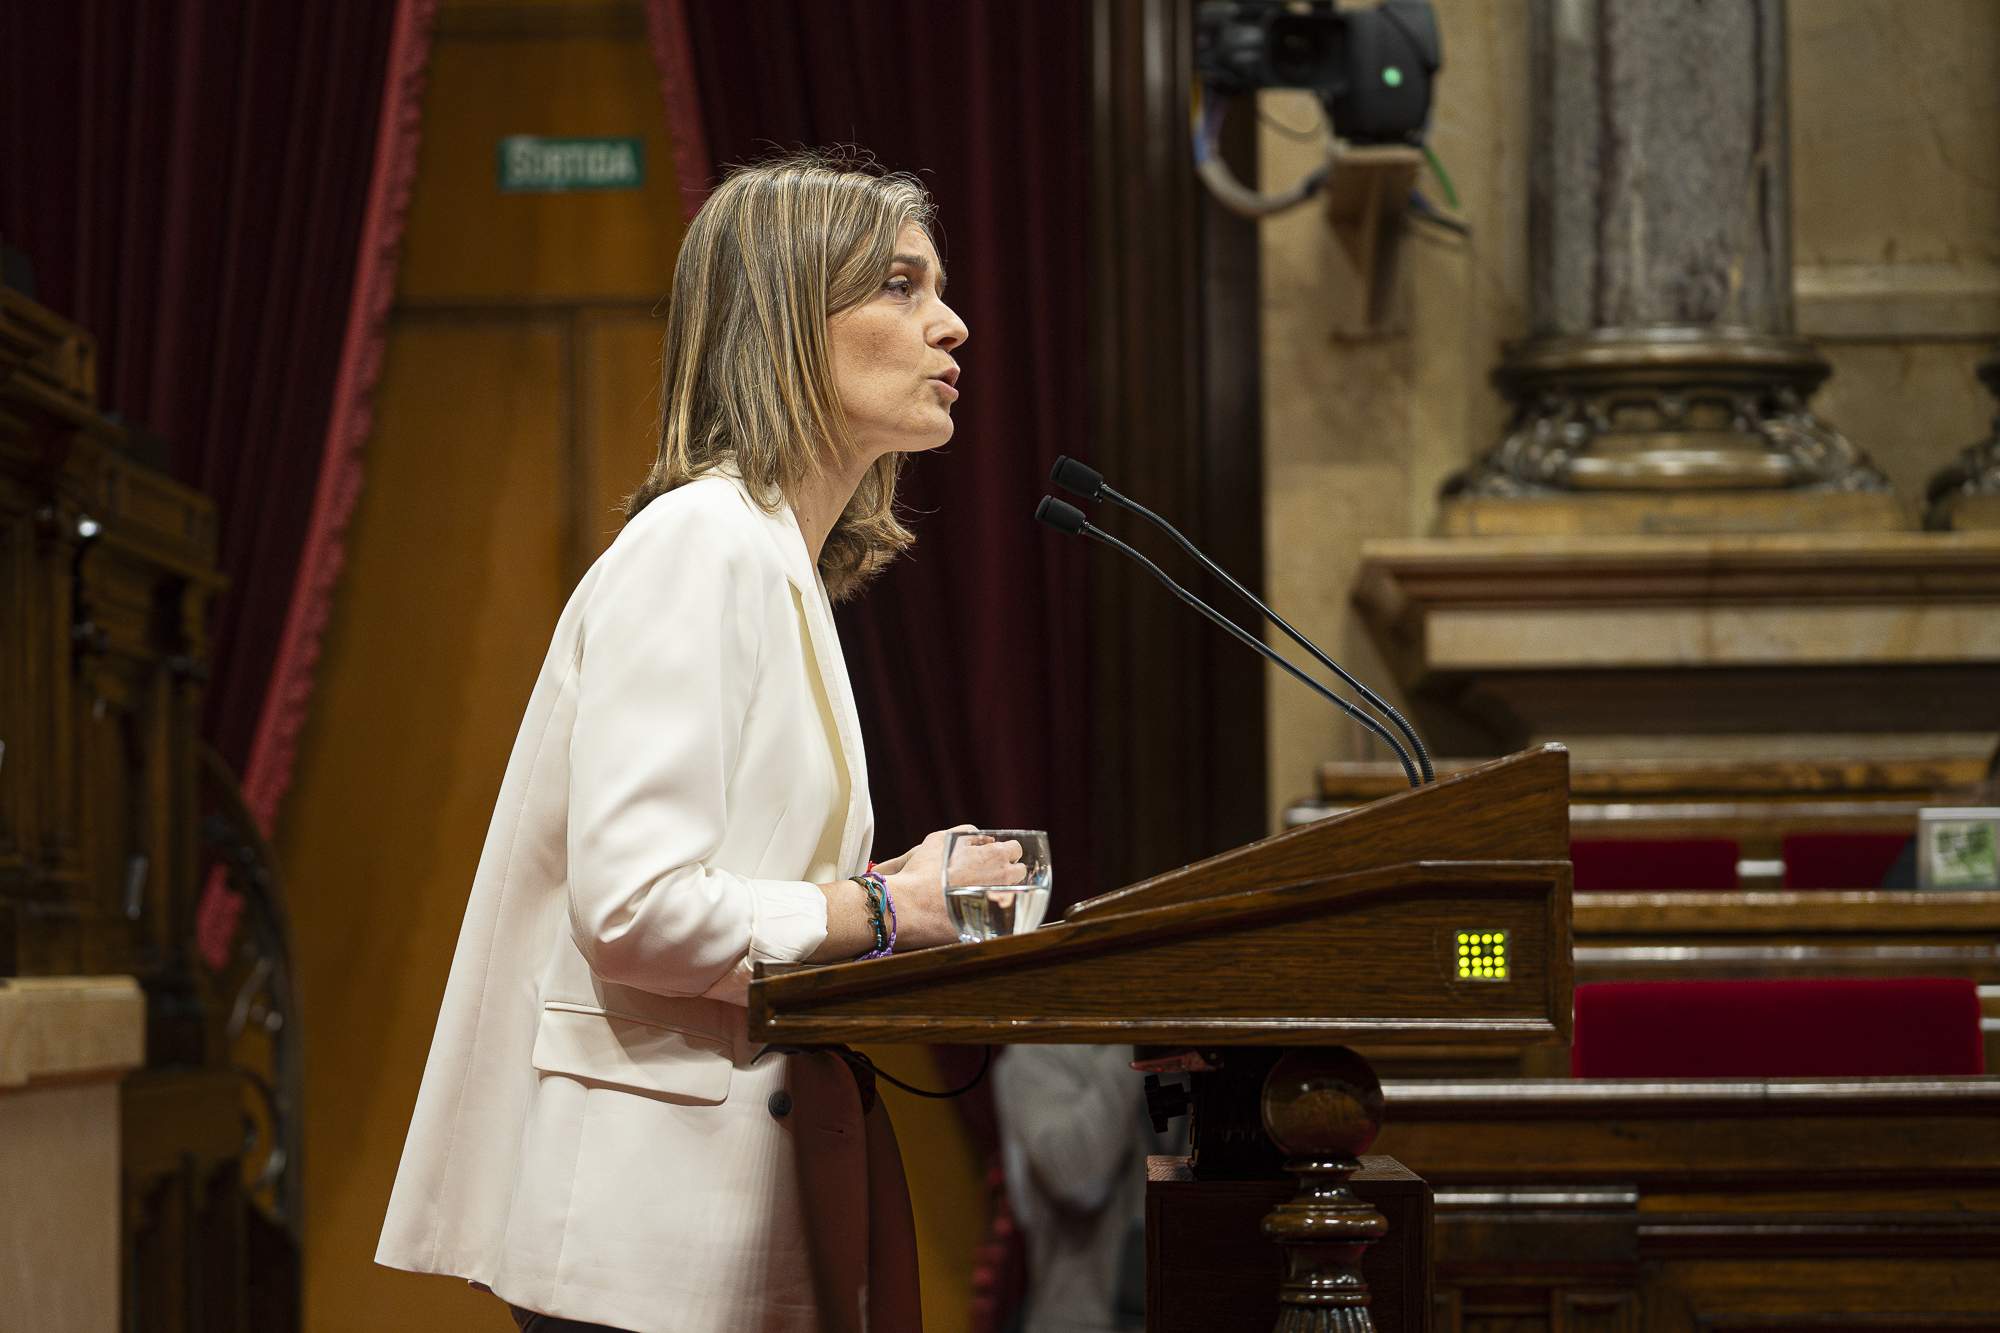 Comuns see election call as "coherent" after their 'no' to Hard Rock resort cornered Aragonès